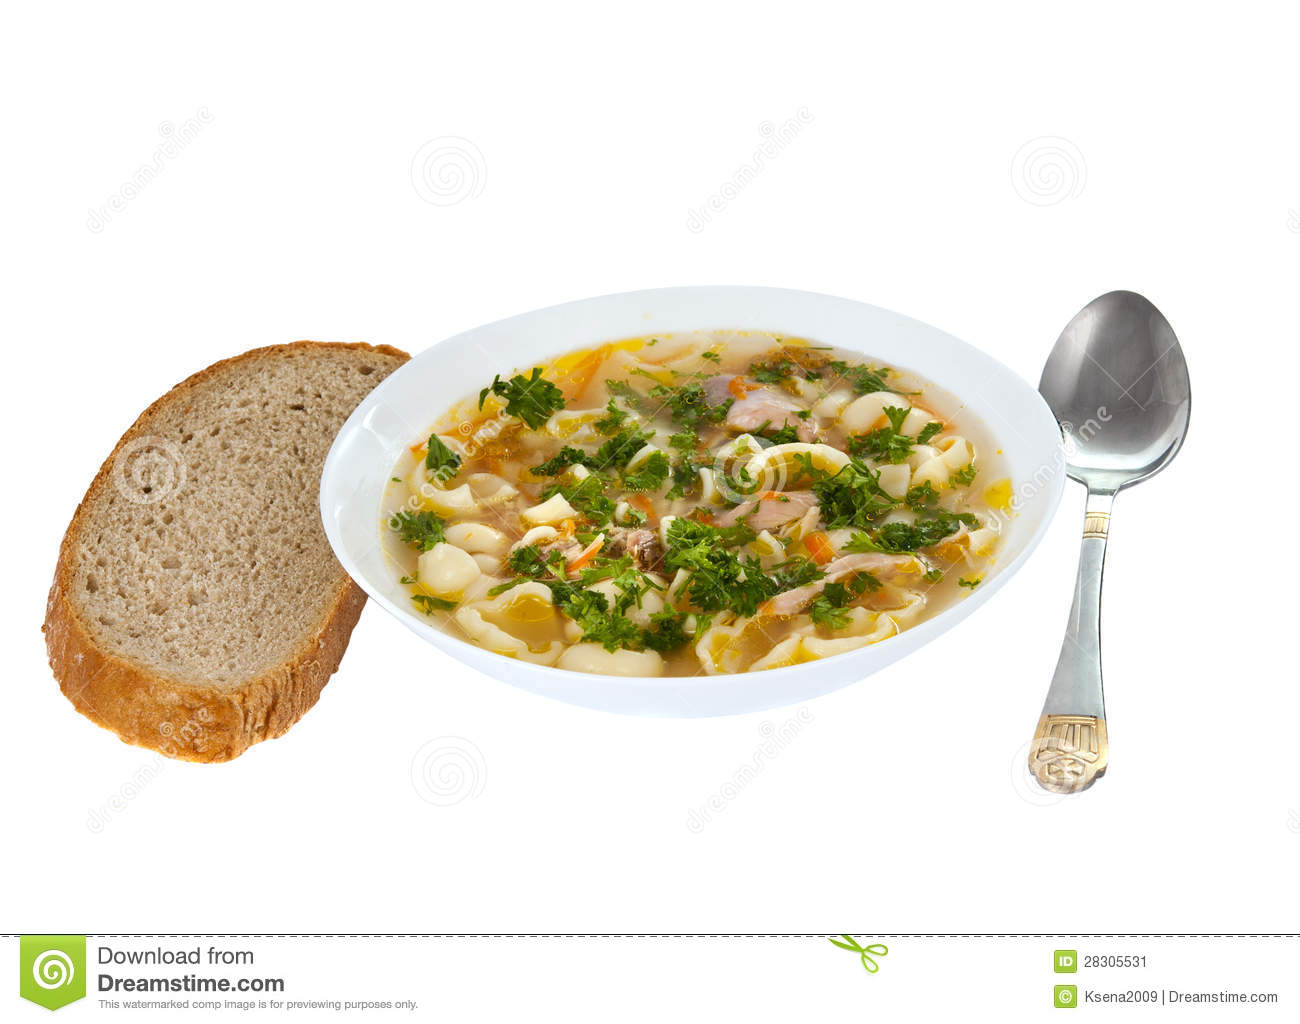 More Similar Stock Images Of   Chicken Noodle Soup   Broth